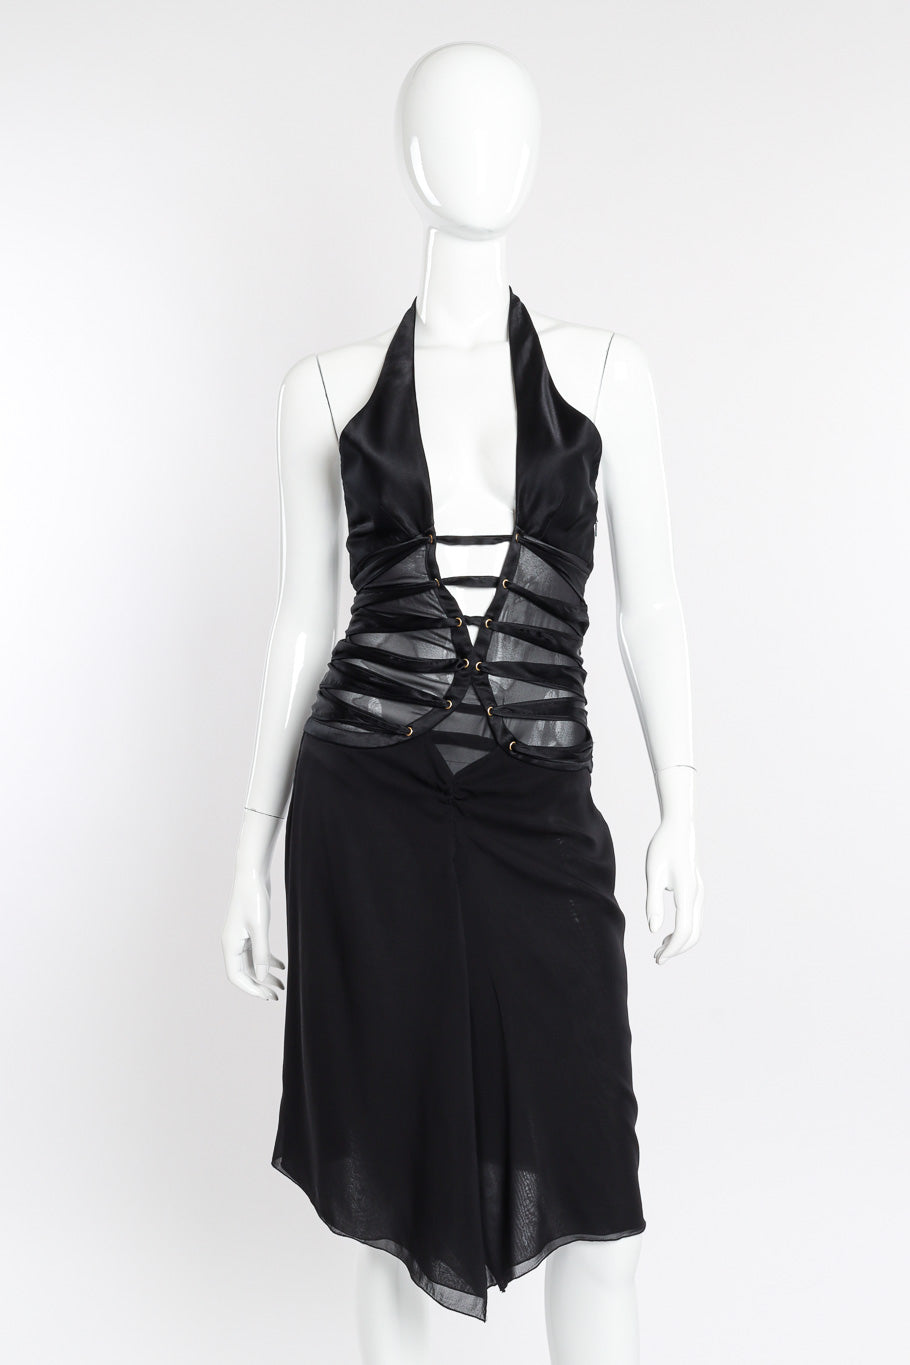 Halter dress by Tom Ford for Gucci on mannequin @recessla